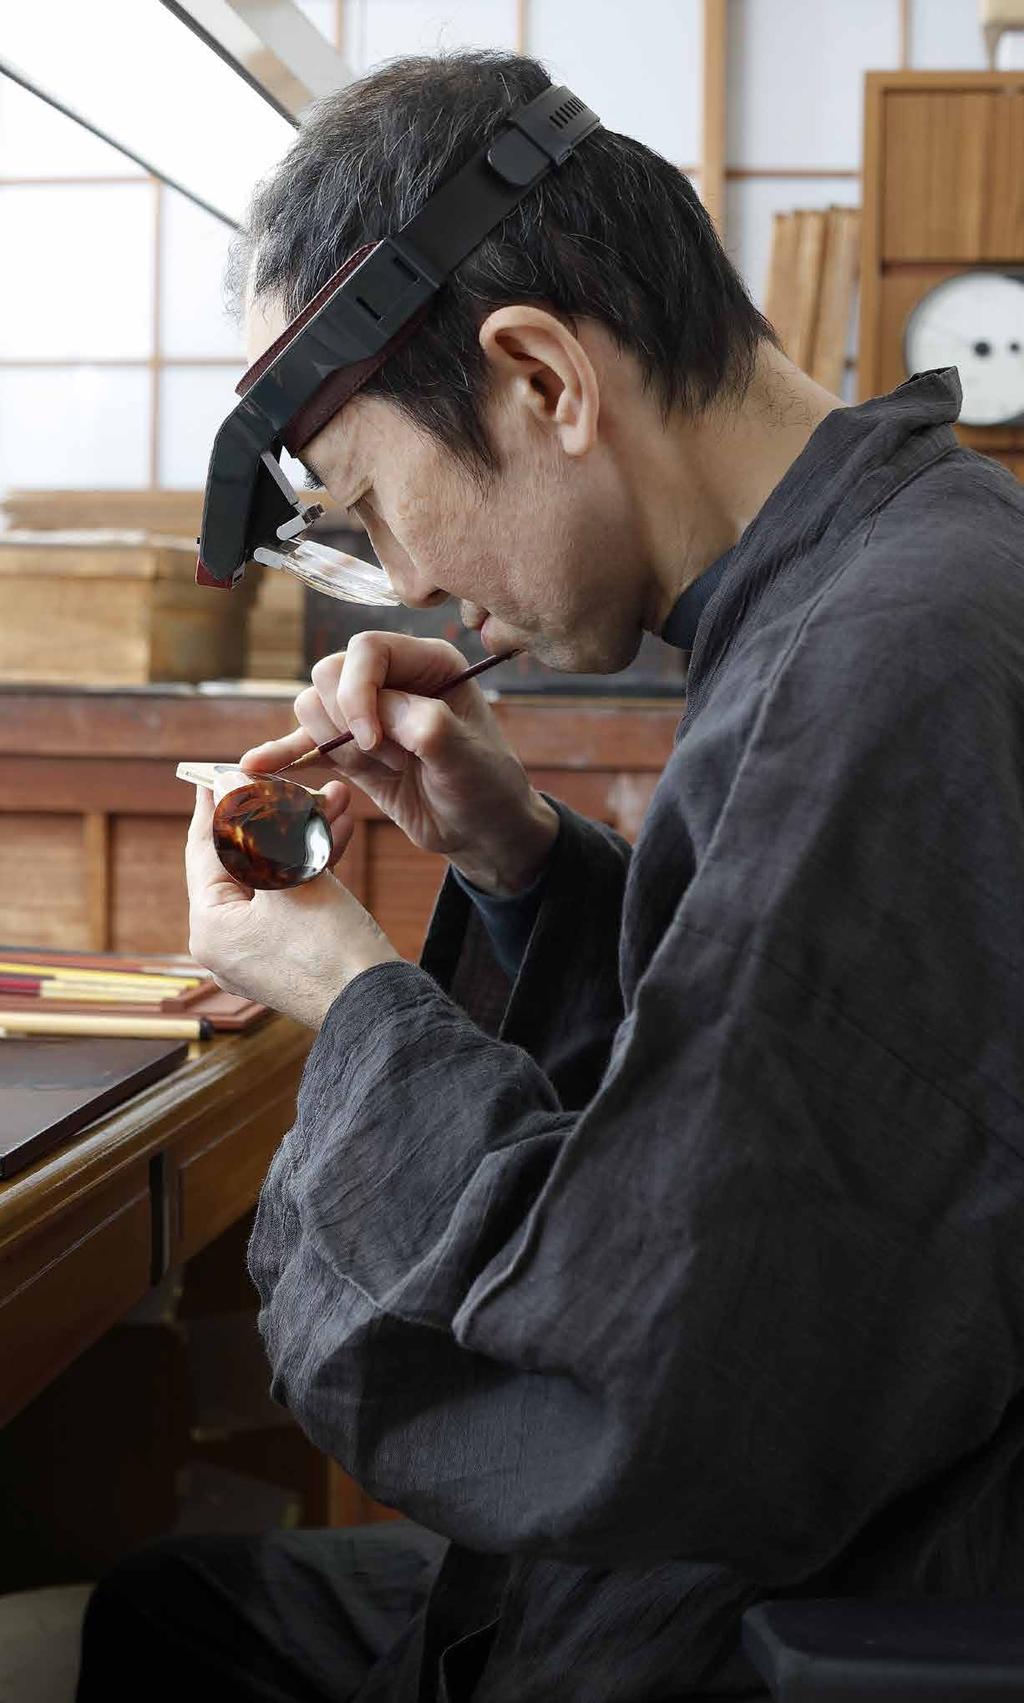 Making of Chopard s L.U.C XP Urushi Year of the Pig; Kiichiro Masumura applying the ancient Japanese lacquer technique, of which he is a master. www.chopard.